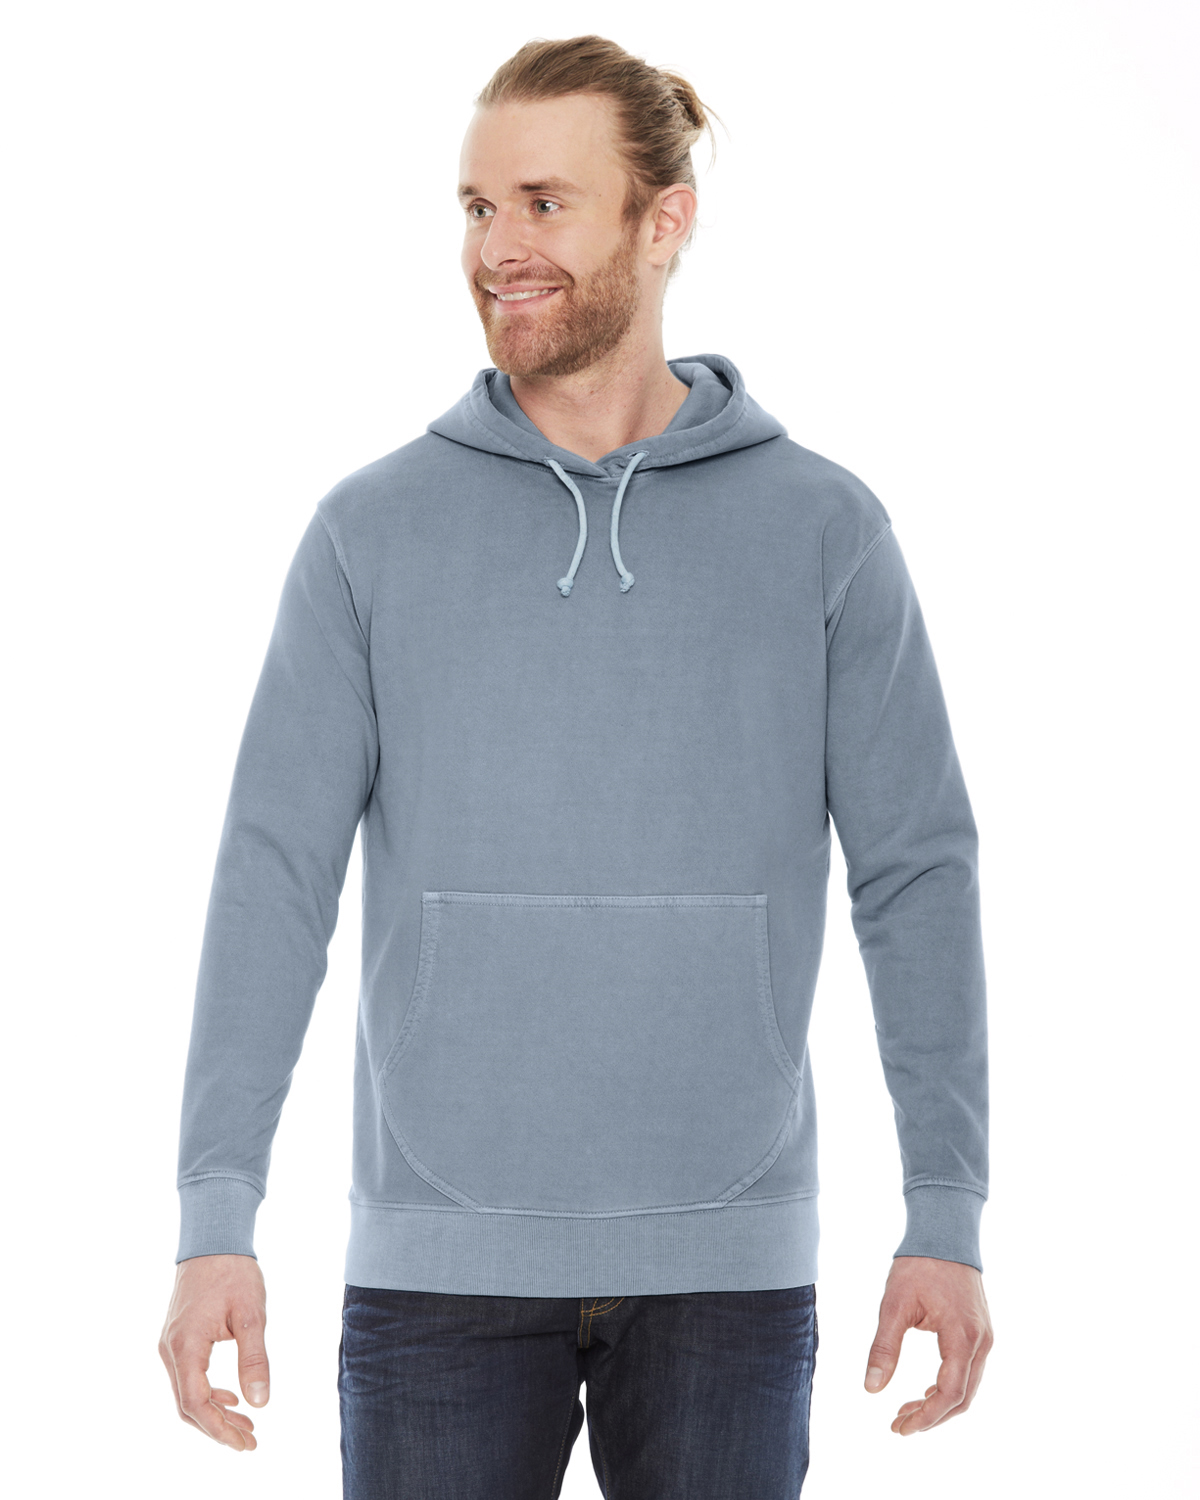 Authentic Pigment AP207 - Unisex French Terry Hoodie